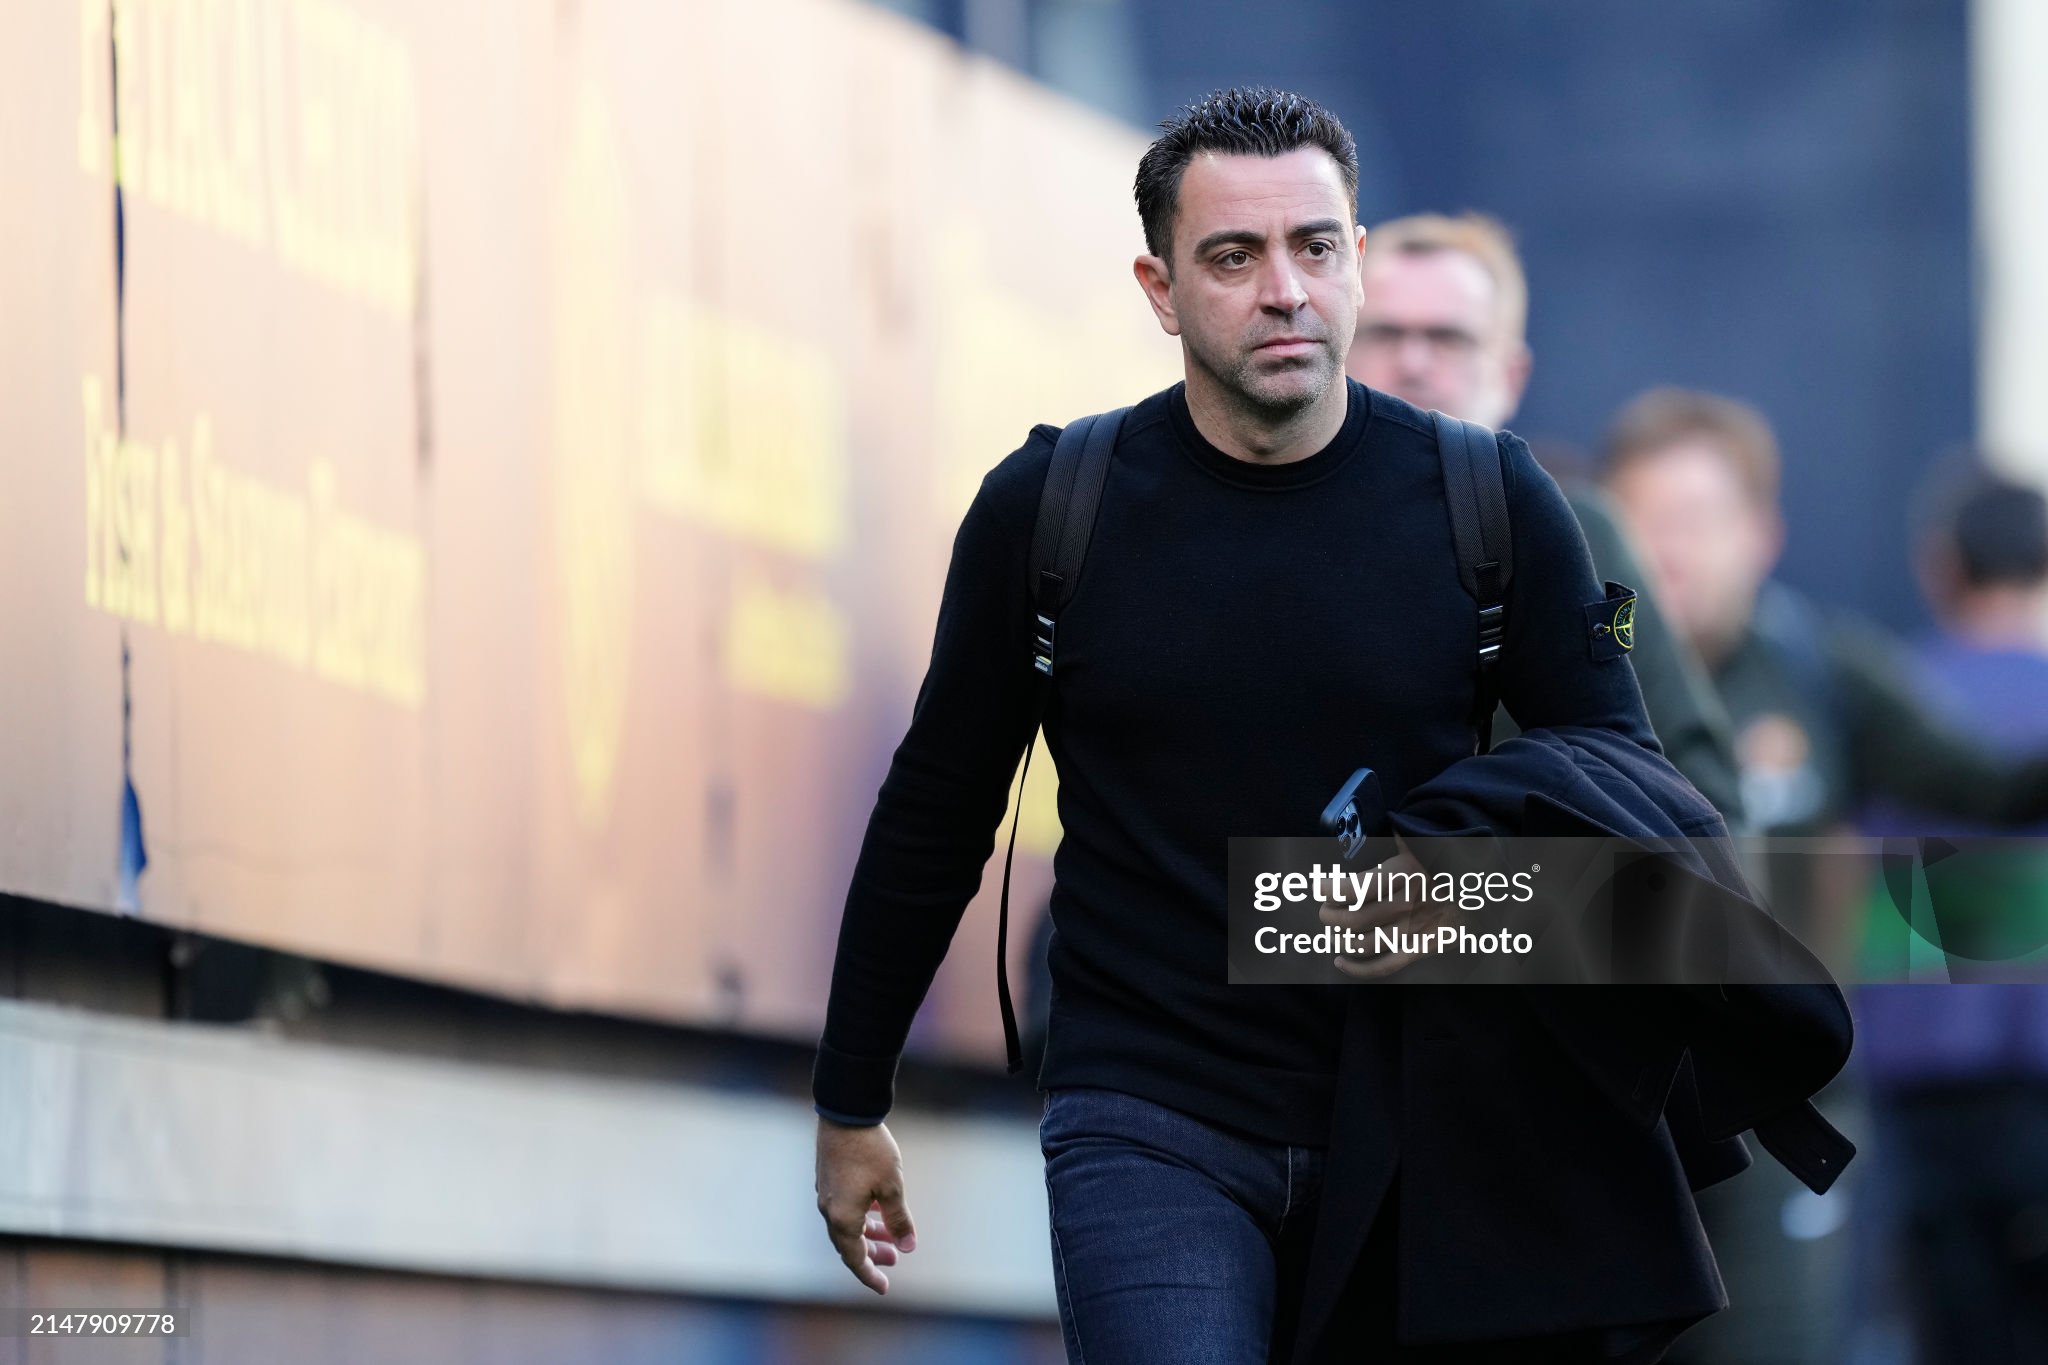 Barcelona confirms Xavi's turnaround: coach to remain after all